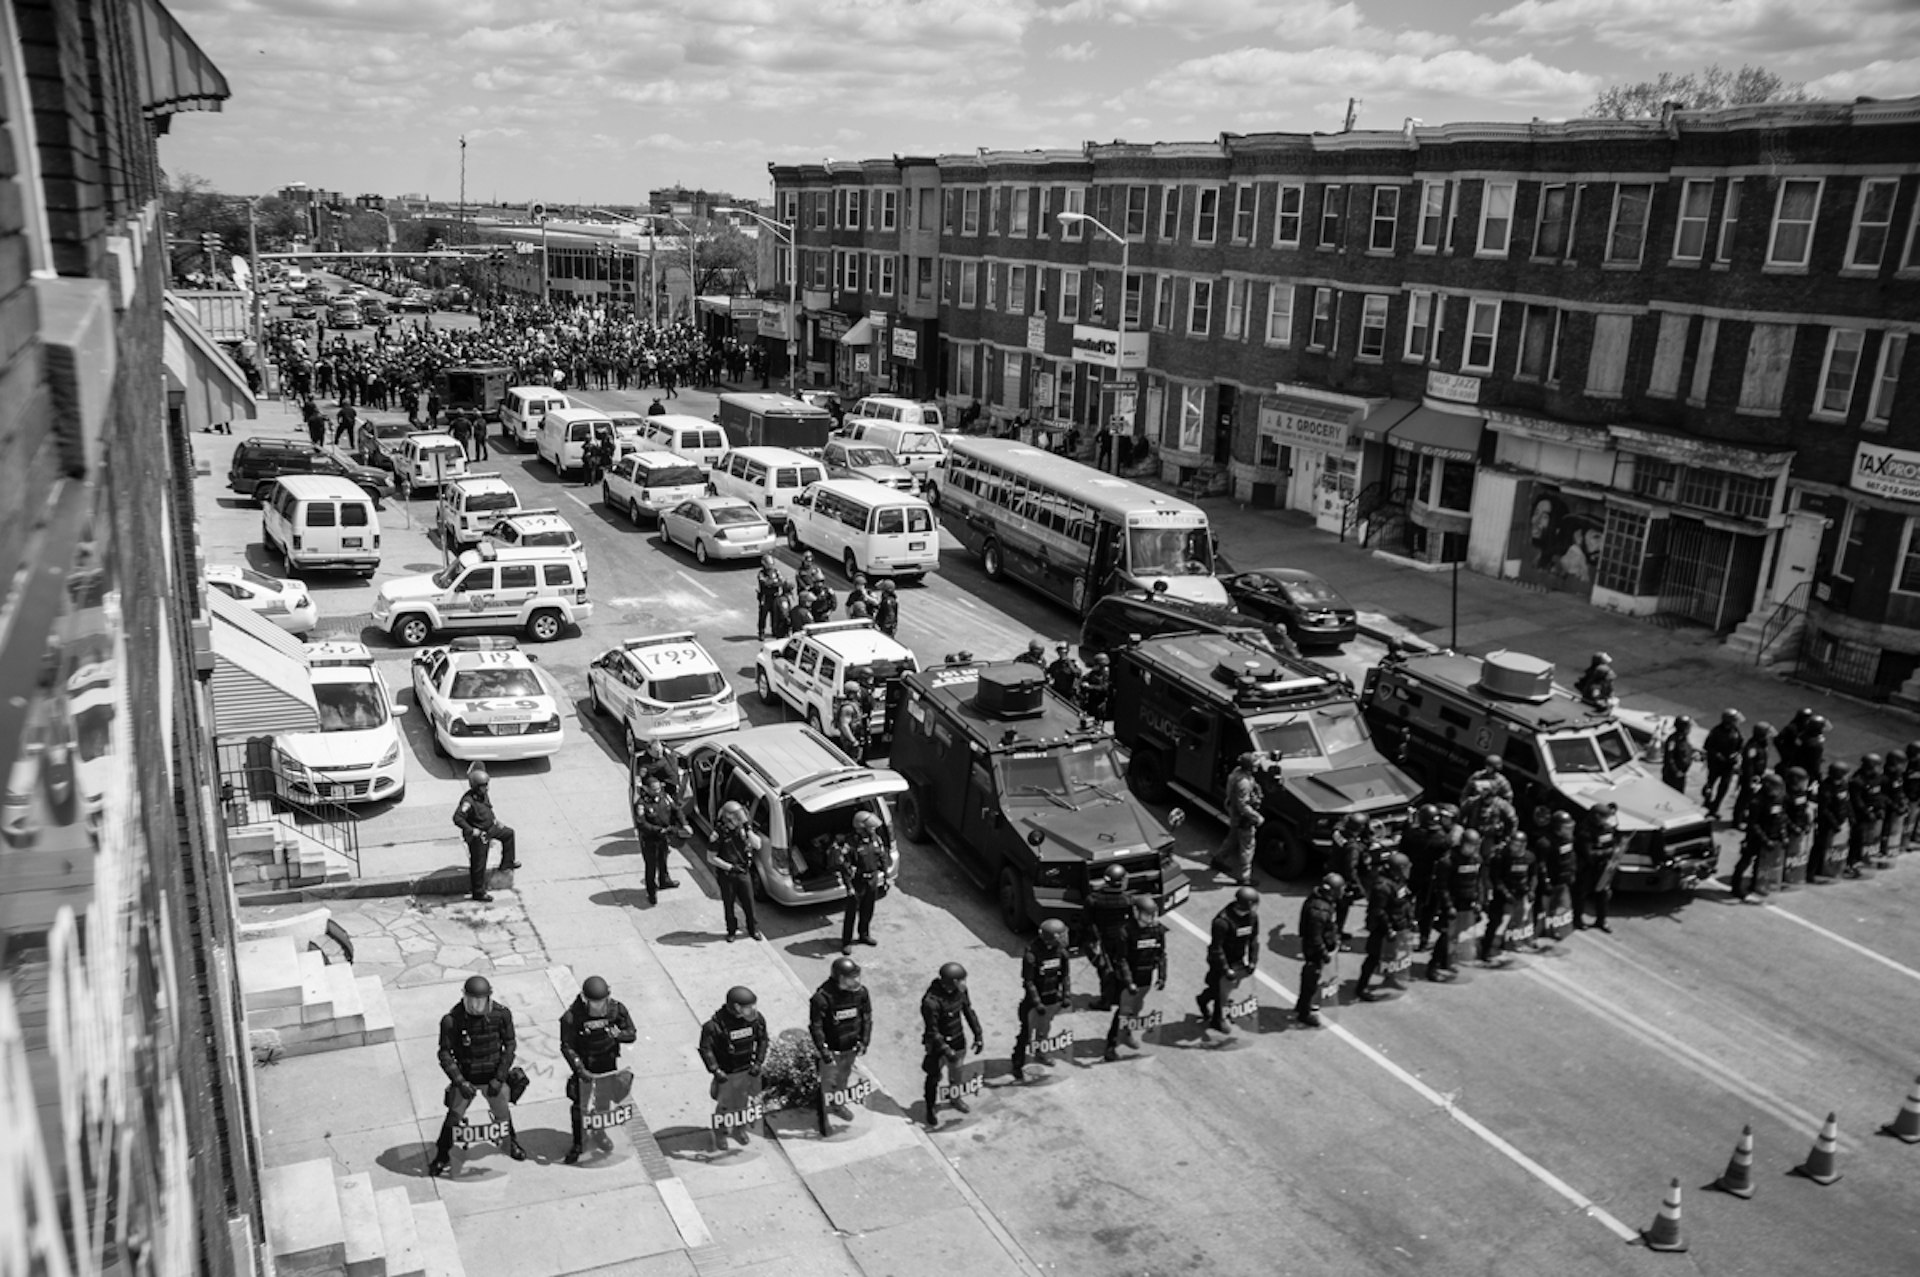 ‘Standoff’ Photo by Michael A. McCoy. Baltimore Uprising, Baltimore, MD, 2015.